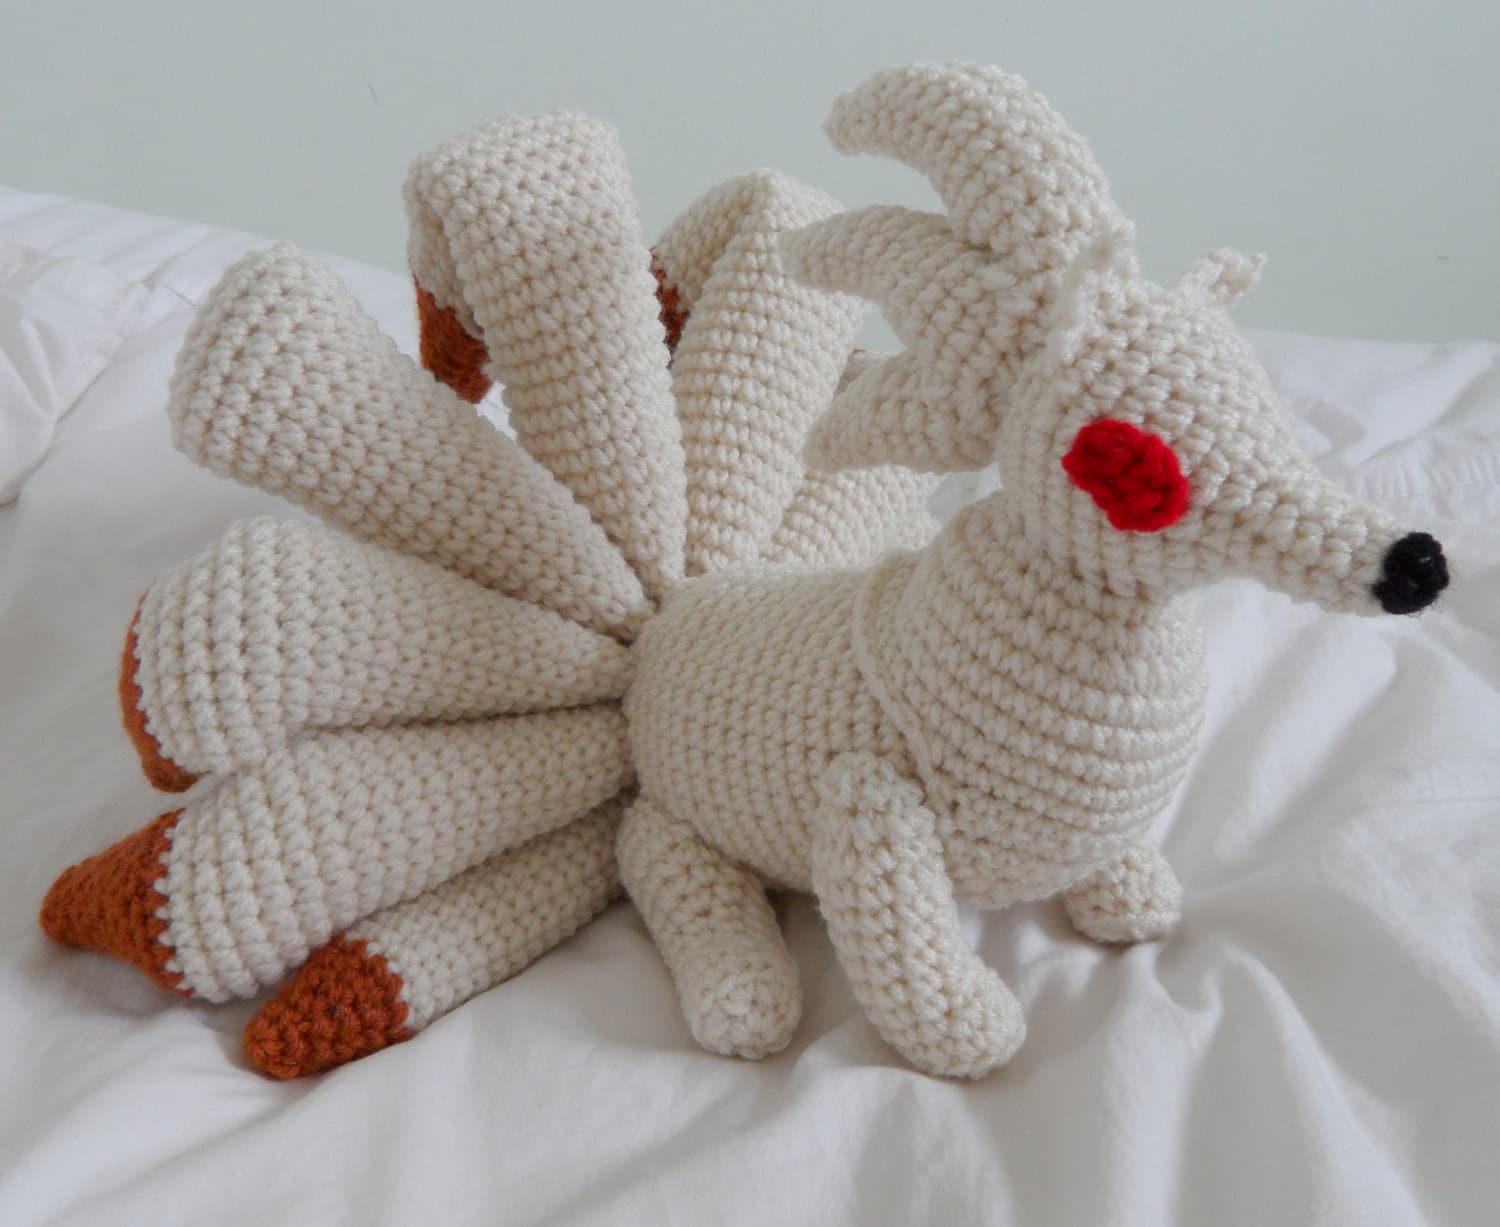 Crocheted Plush Pokémon Characters With Insane Detail